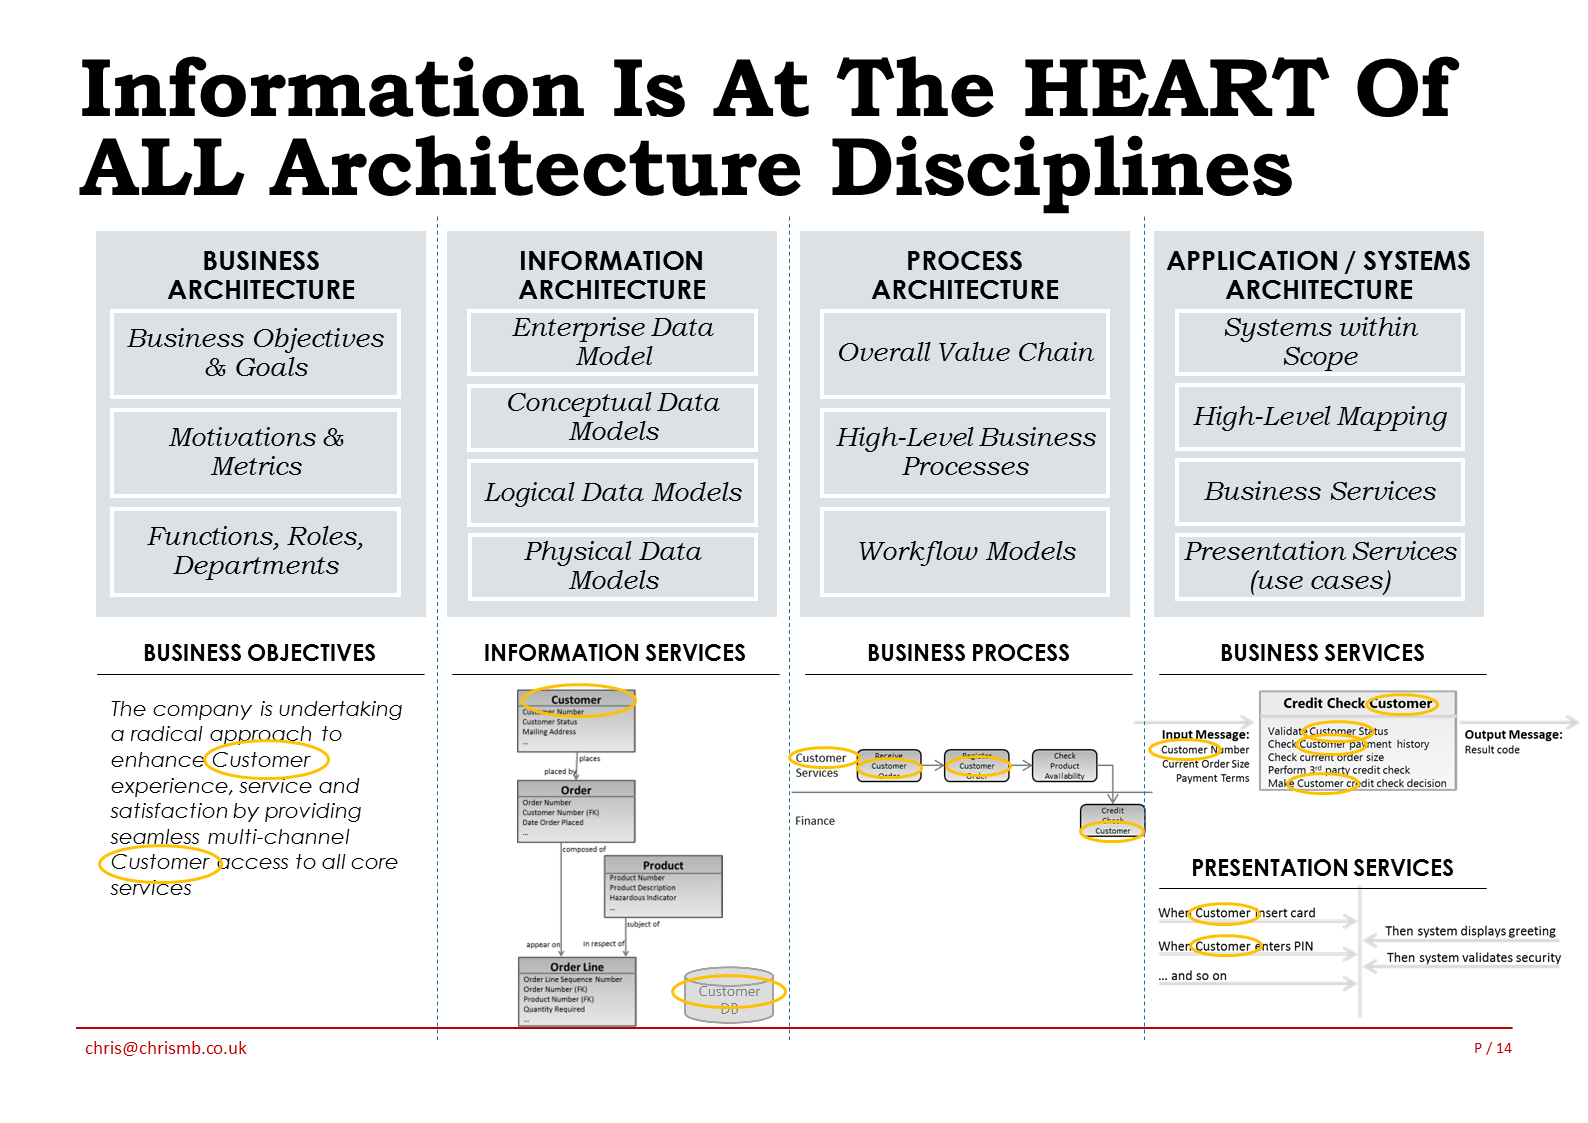 Data Model at the heart